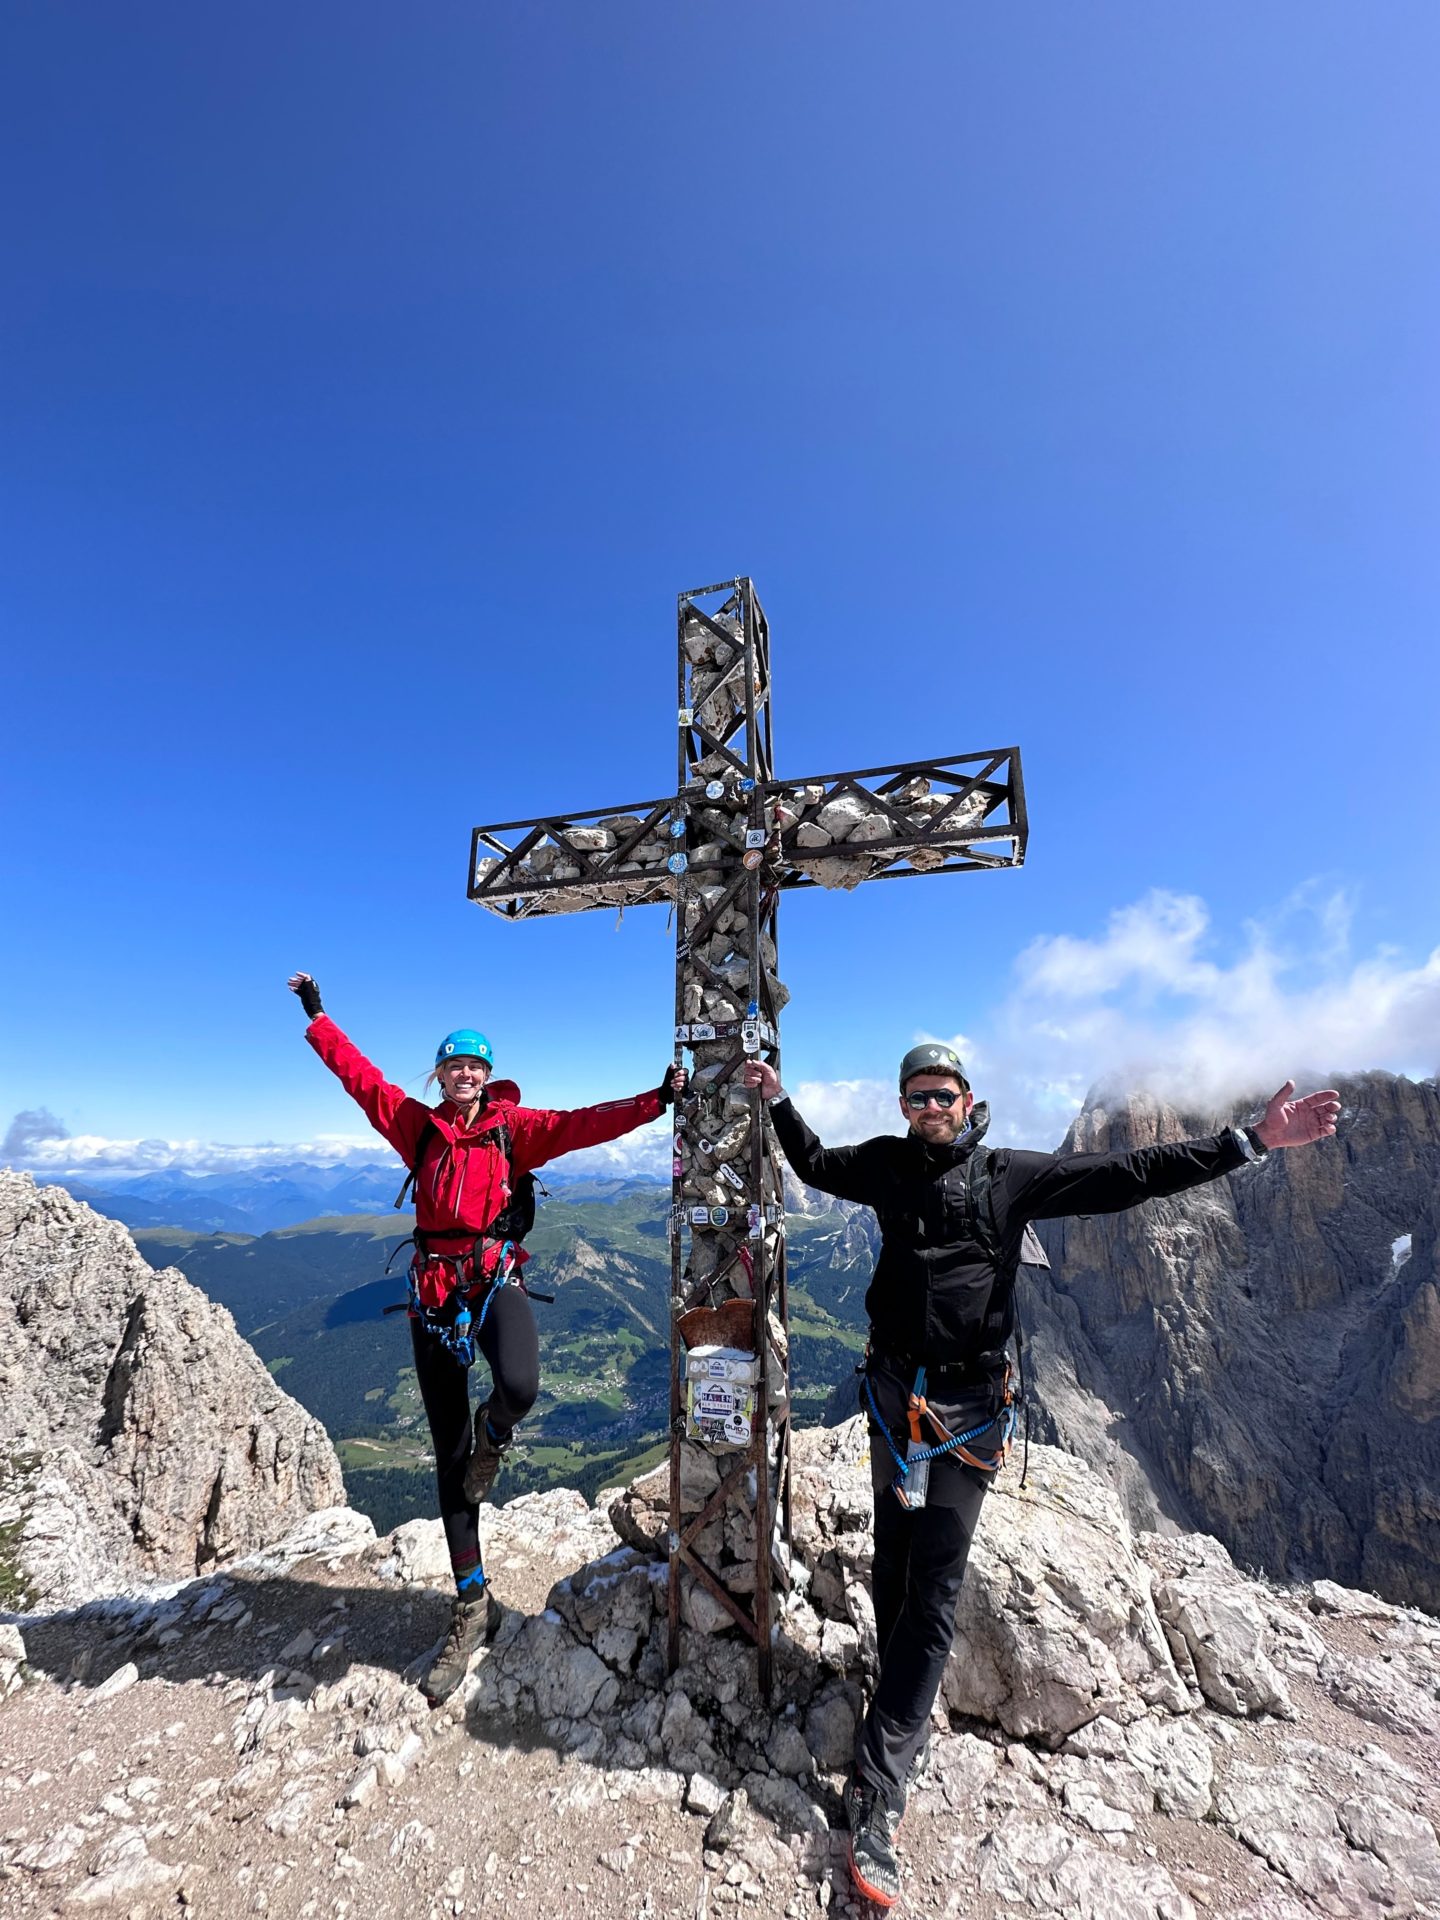 Zanna van Dijk and a friend at the summit of a mountain in the Dolomites